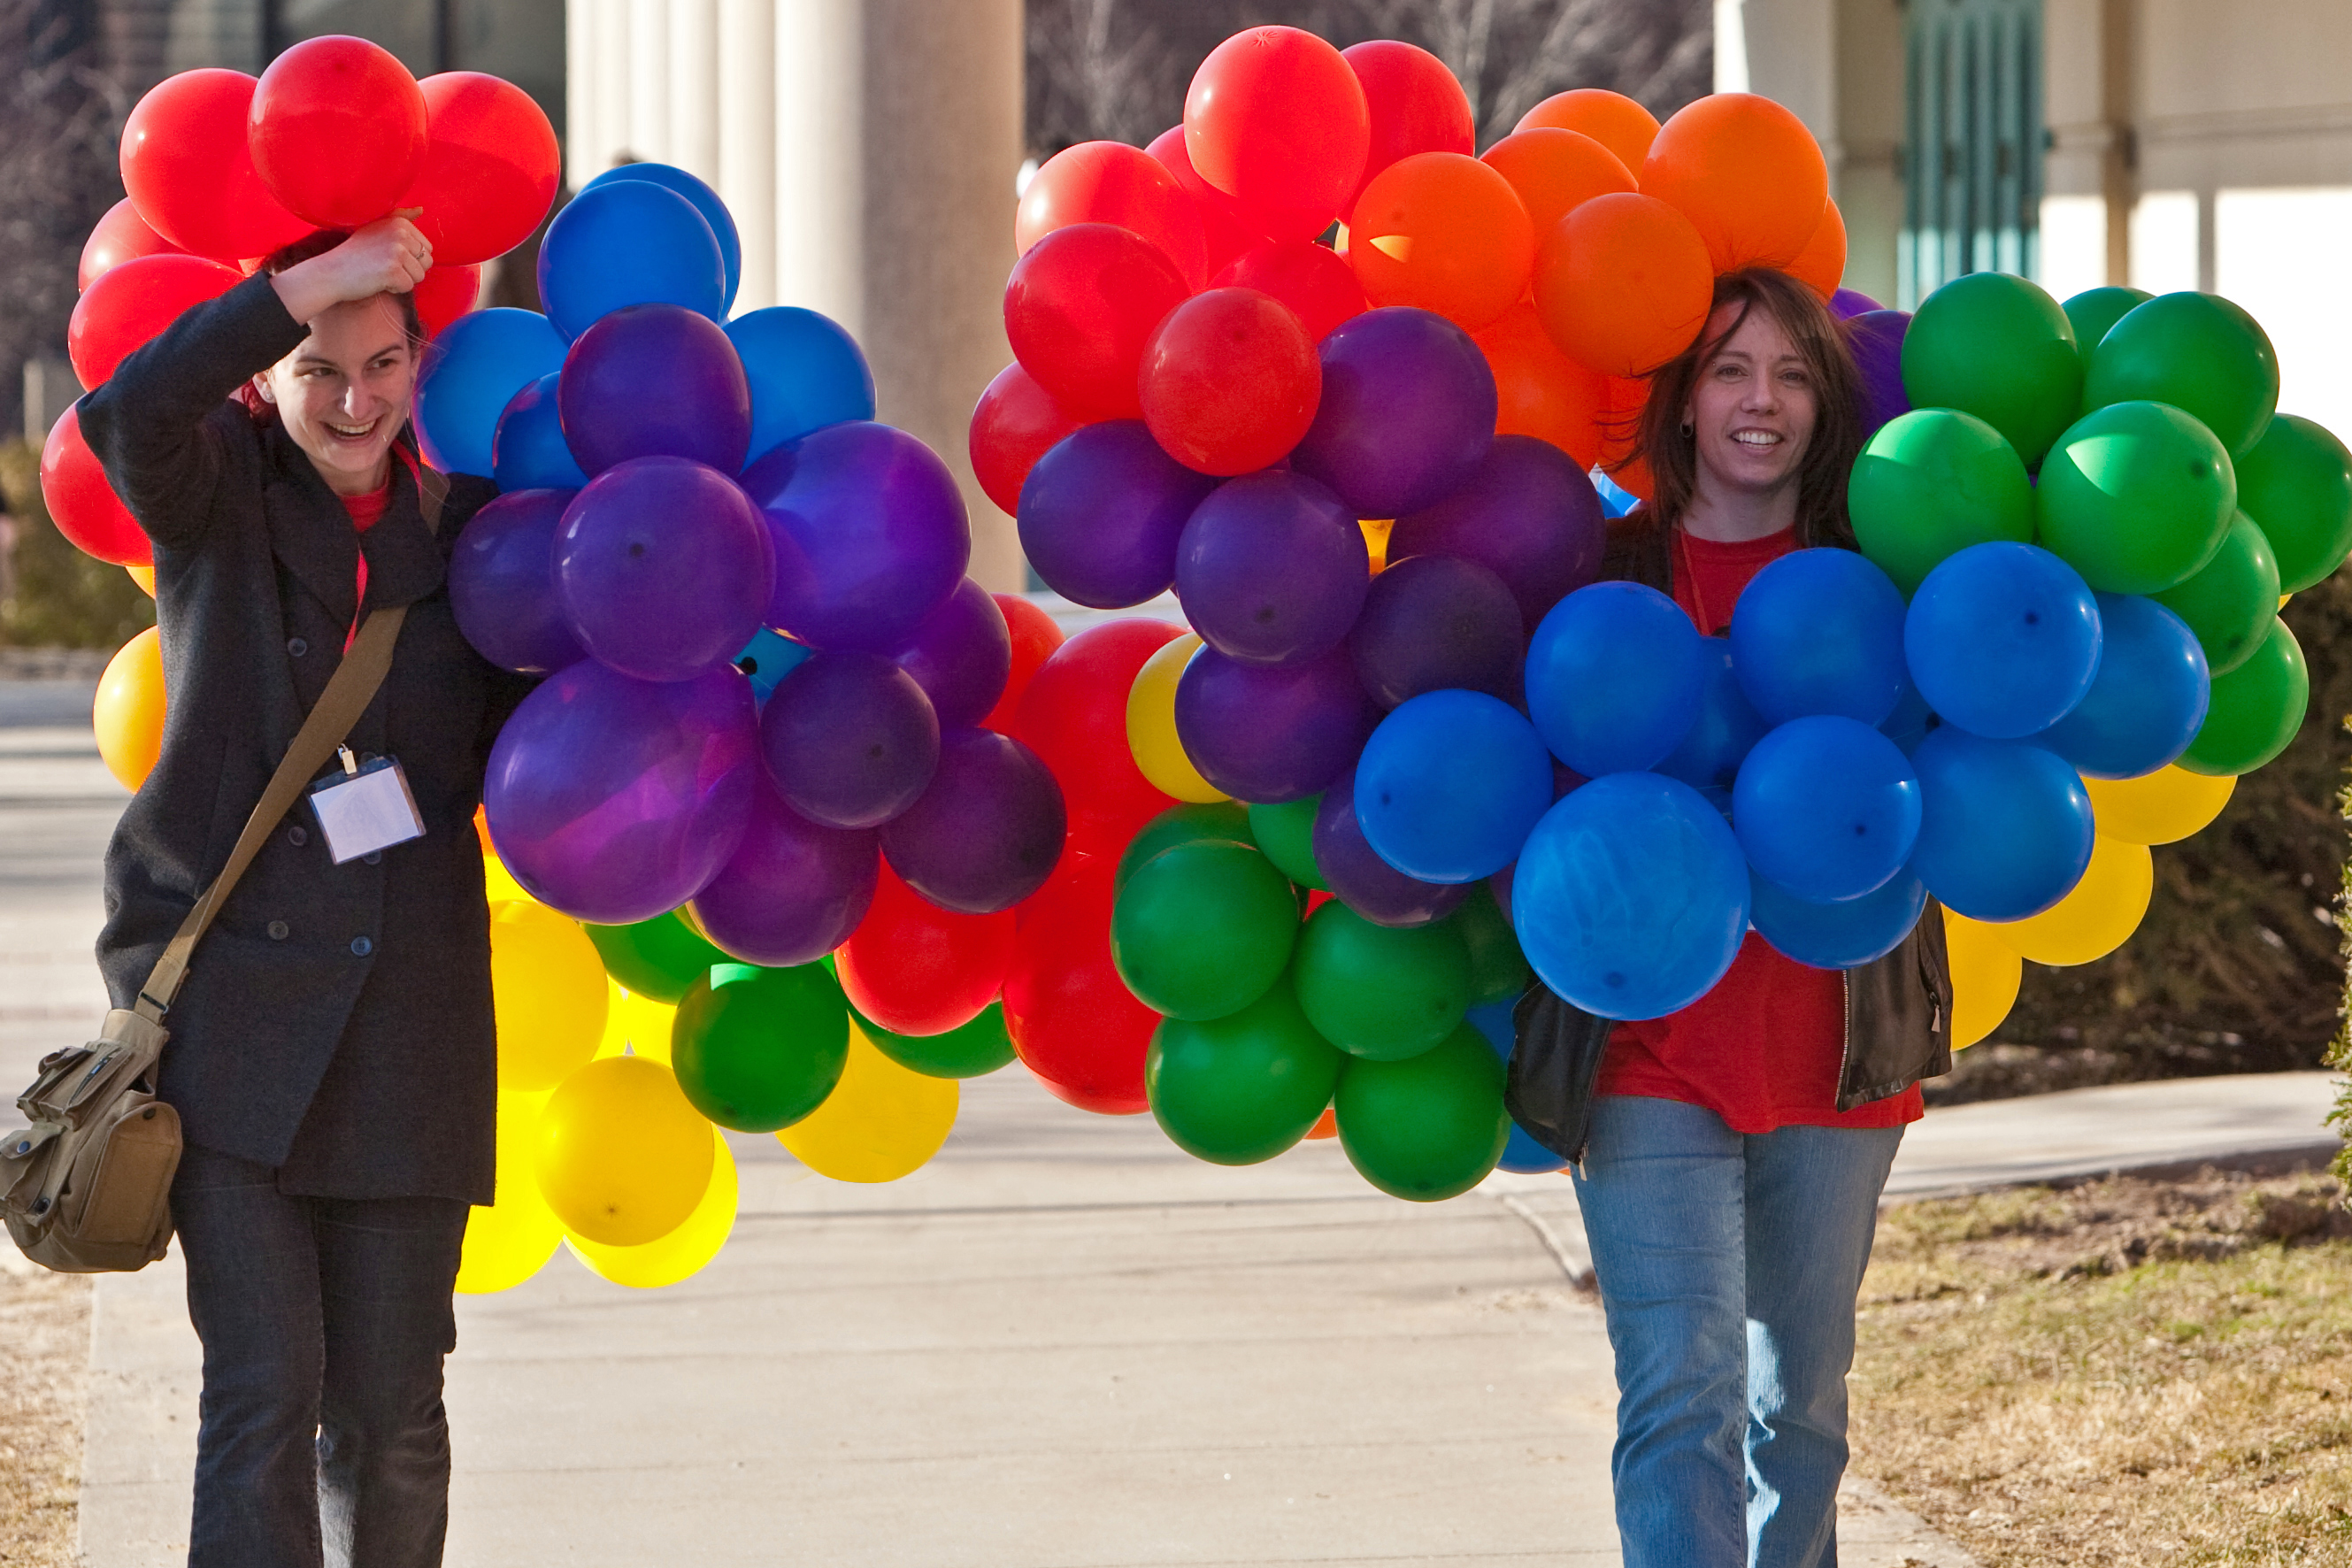 Two people walking with colorful balloons